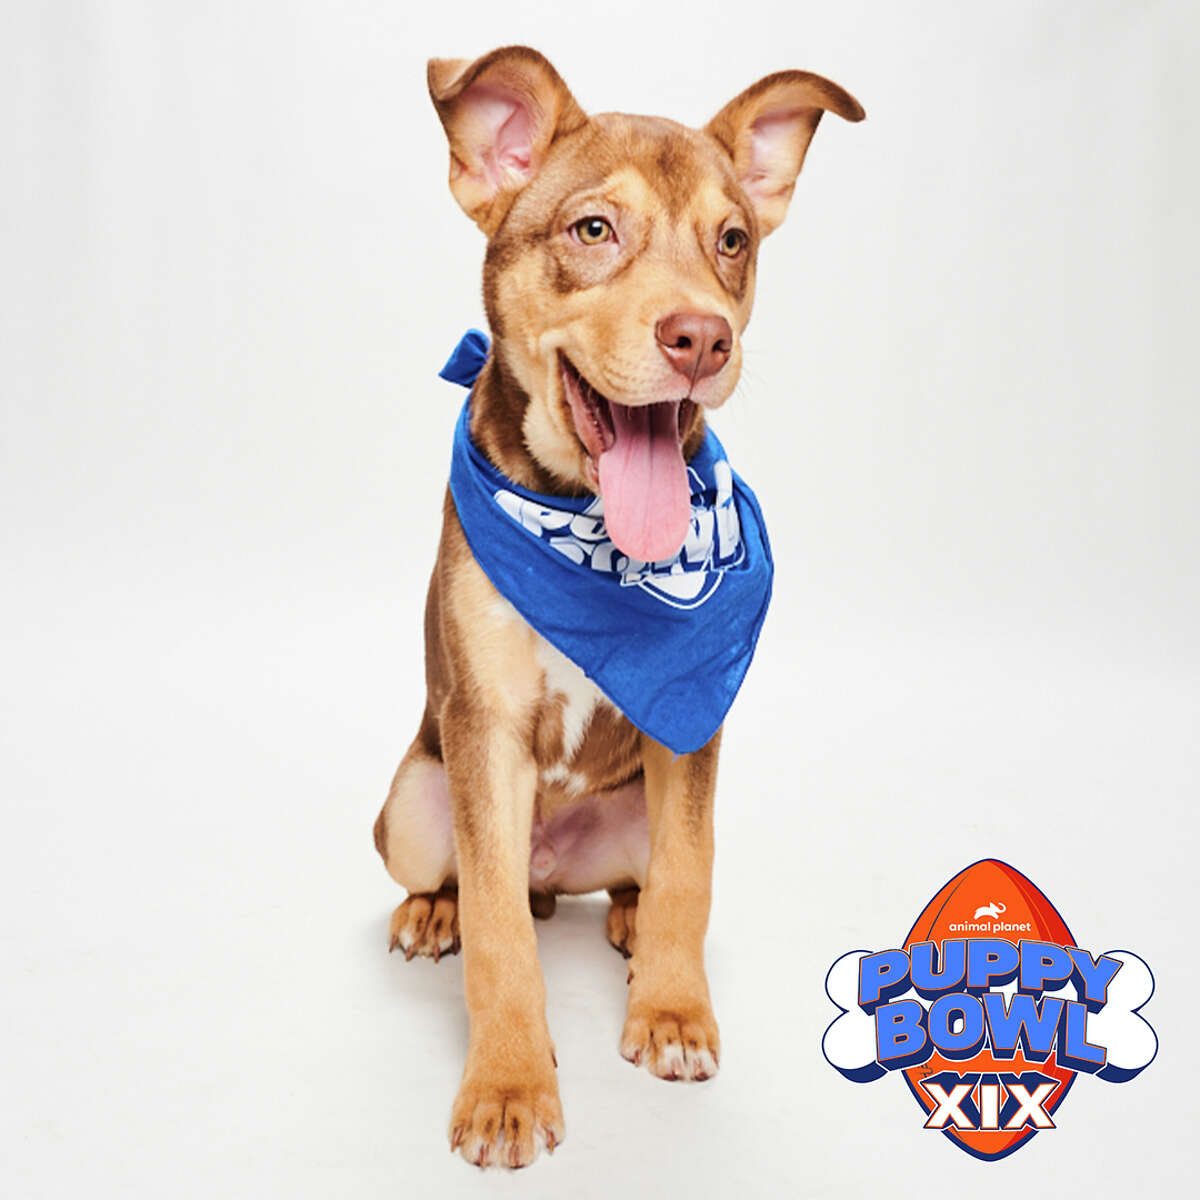 Schnitzel from ROAR will play in this year's Puppy Bowl on Sunday, Feb. 12